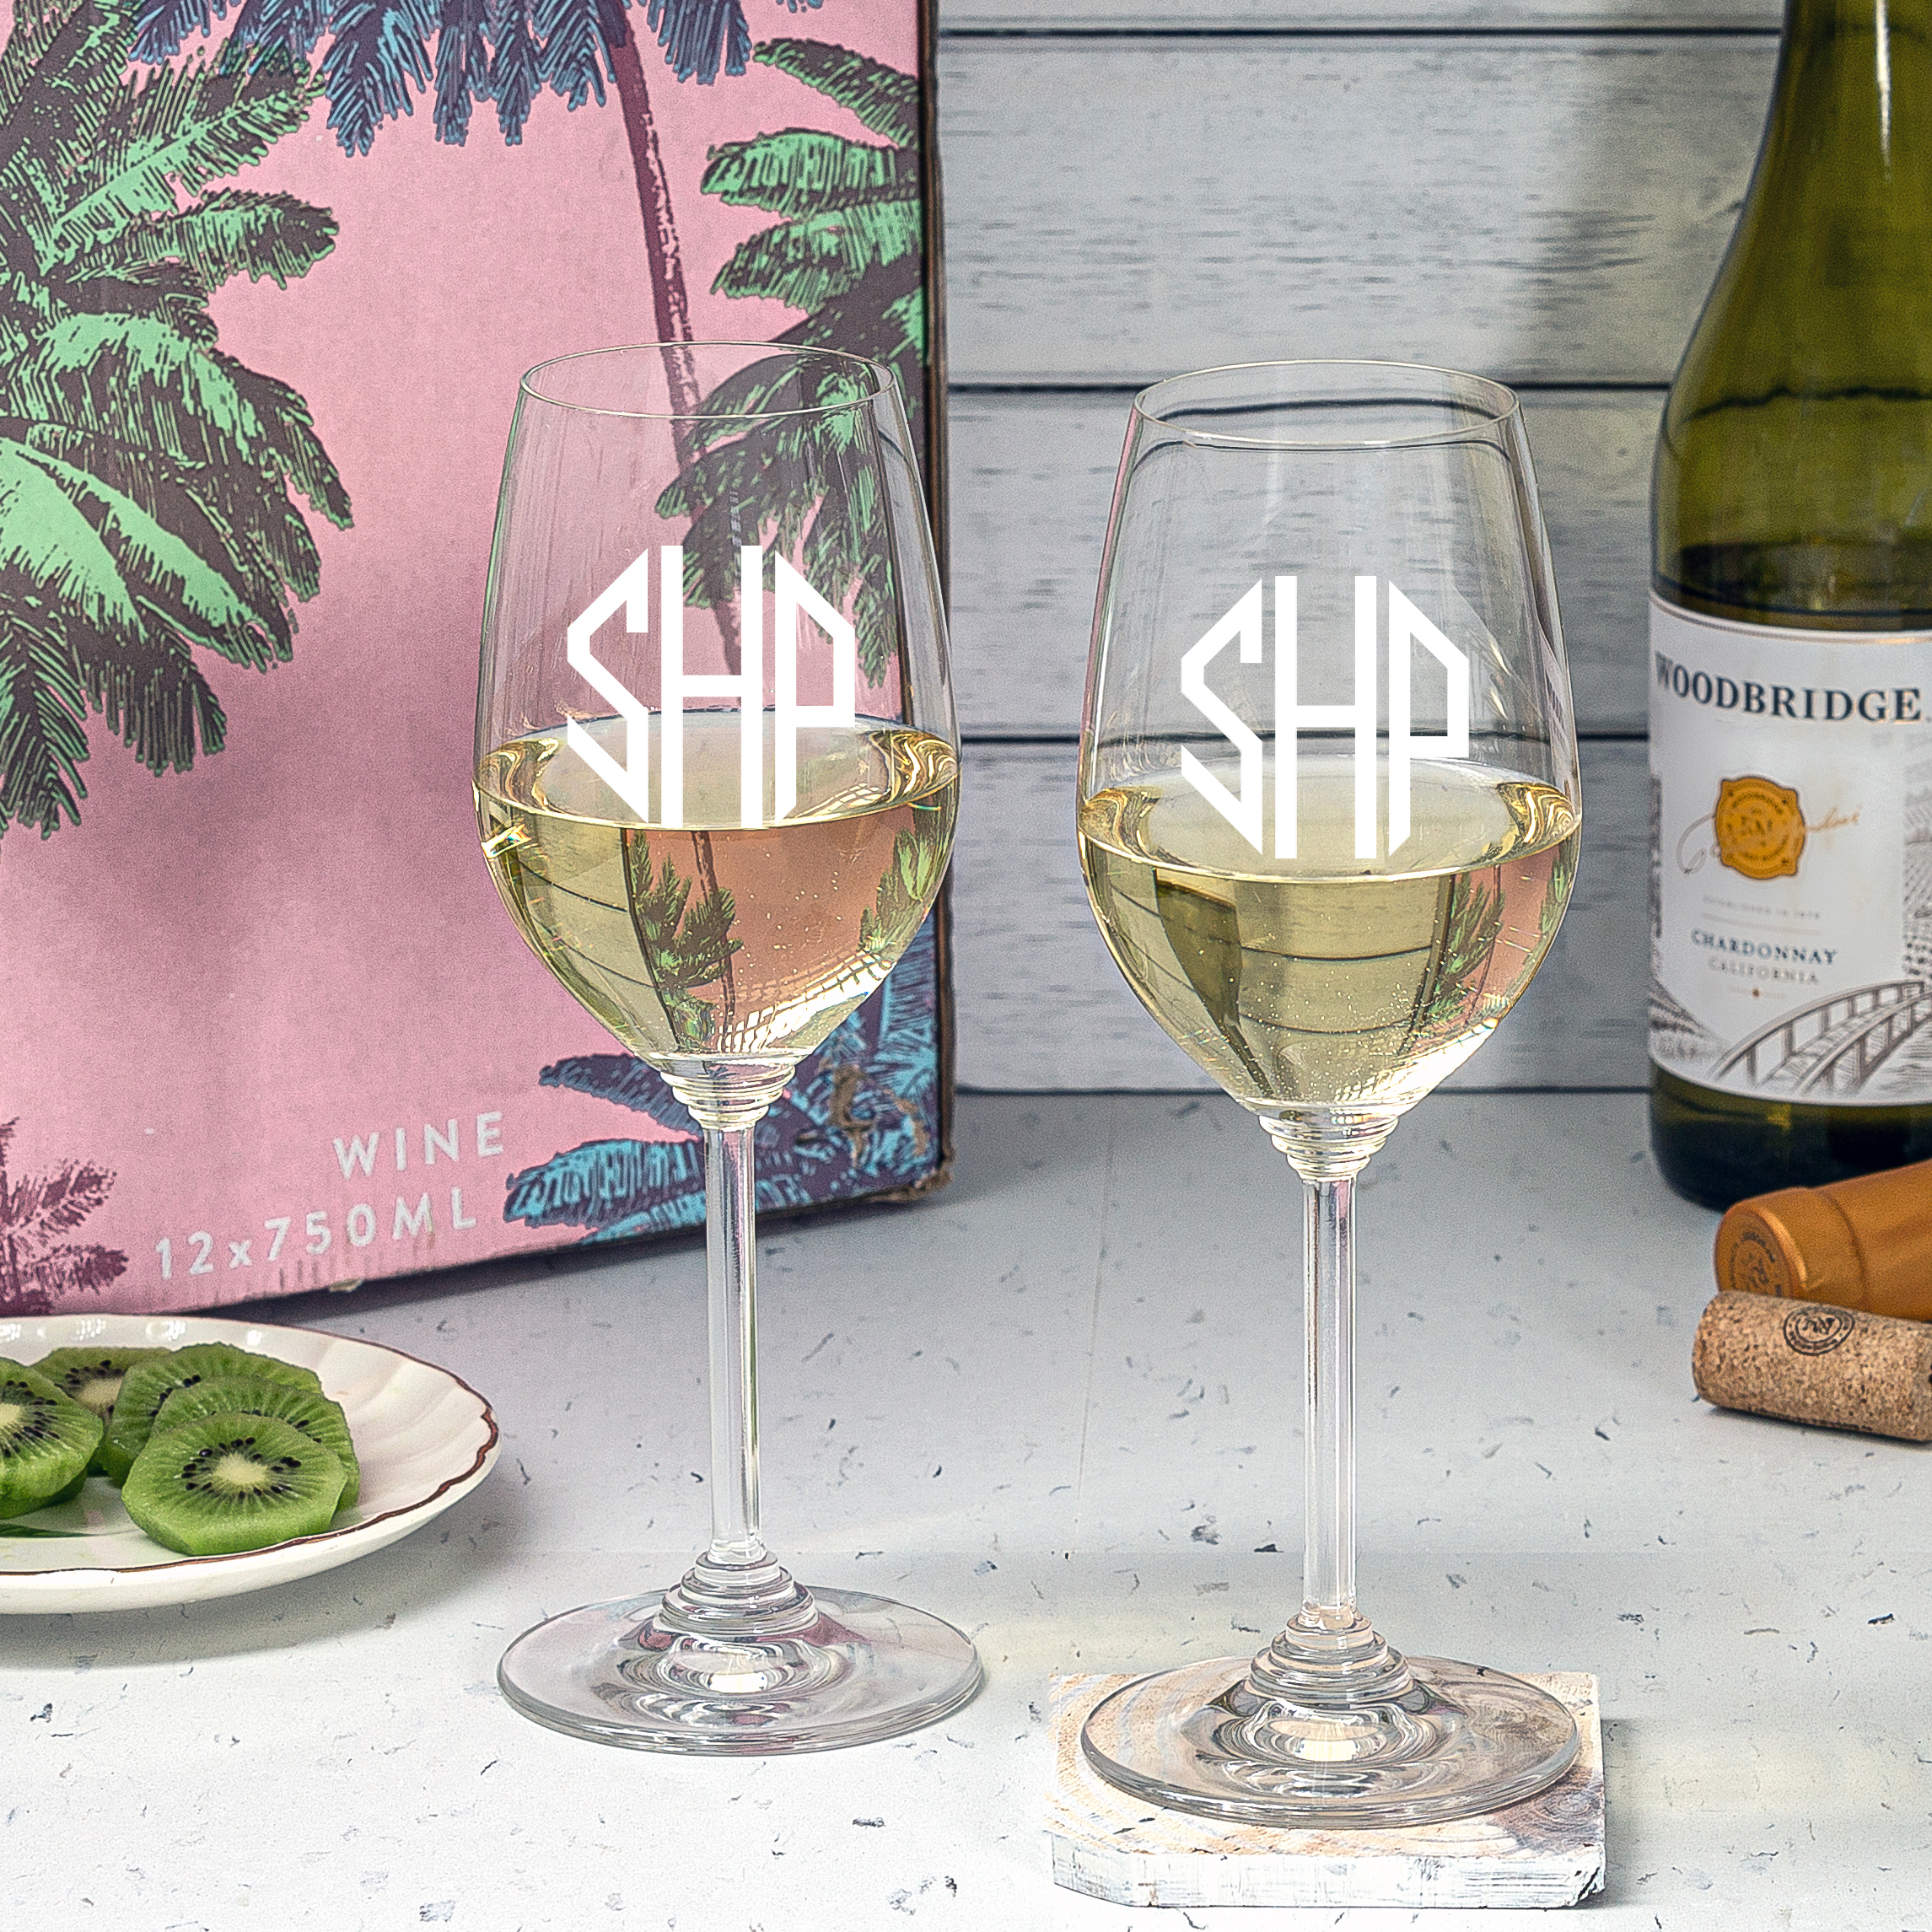 https://cdn11.bigcommerce.com/s-b5w84/images/stencil/original/products/3056/5804/Riedel_Everyday_White_Wine__79287.1659405518.jpg?c=2